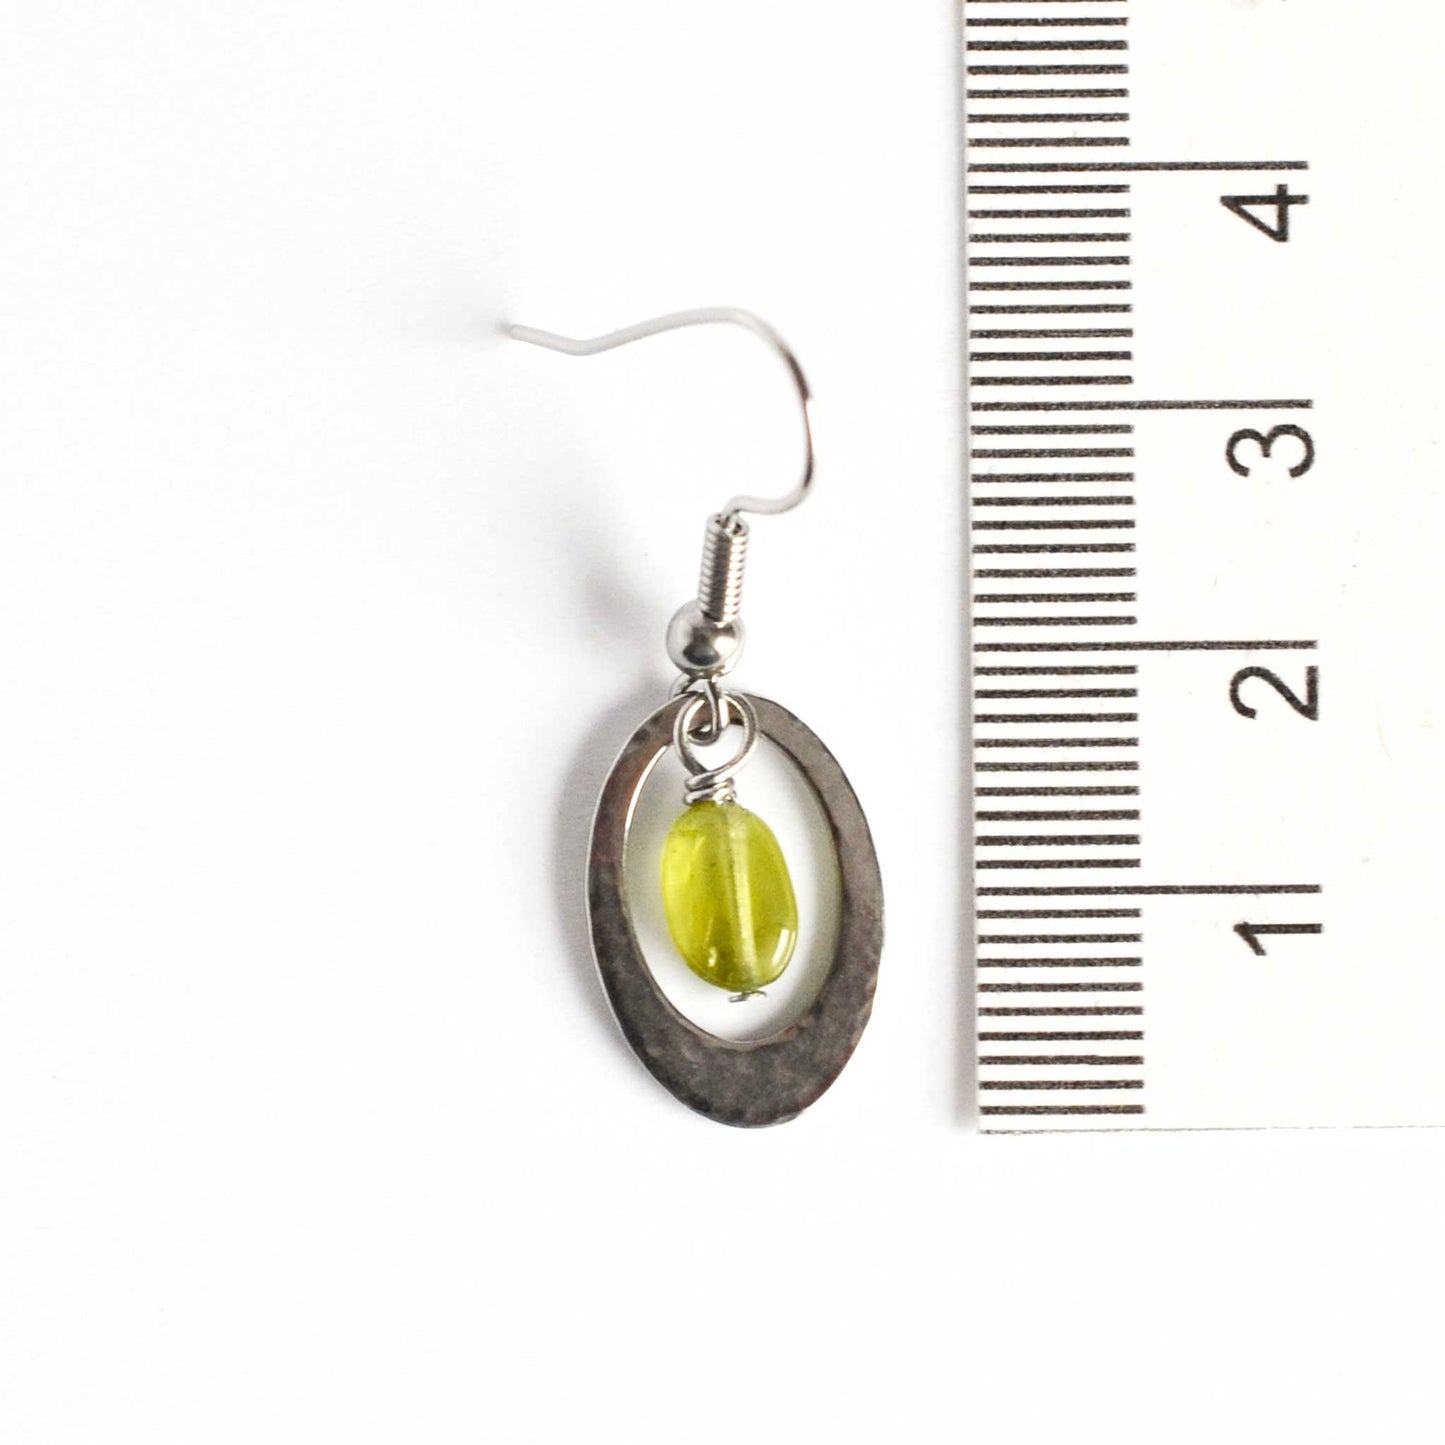 35mm long Peridot and stainless steel oval drop earrings next to ruler.